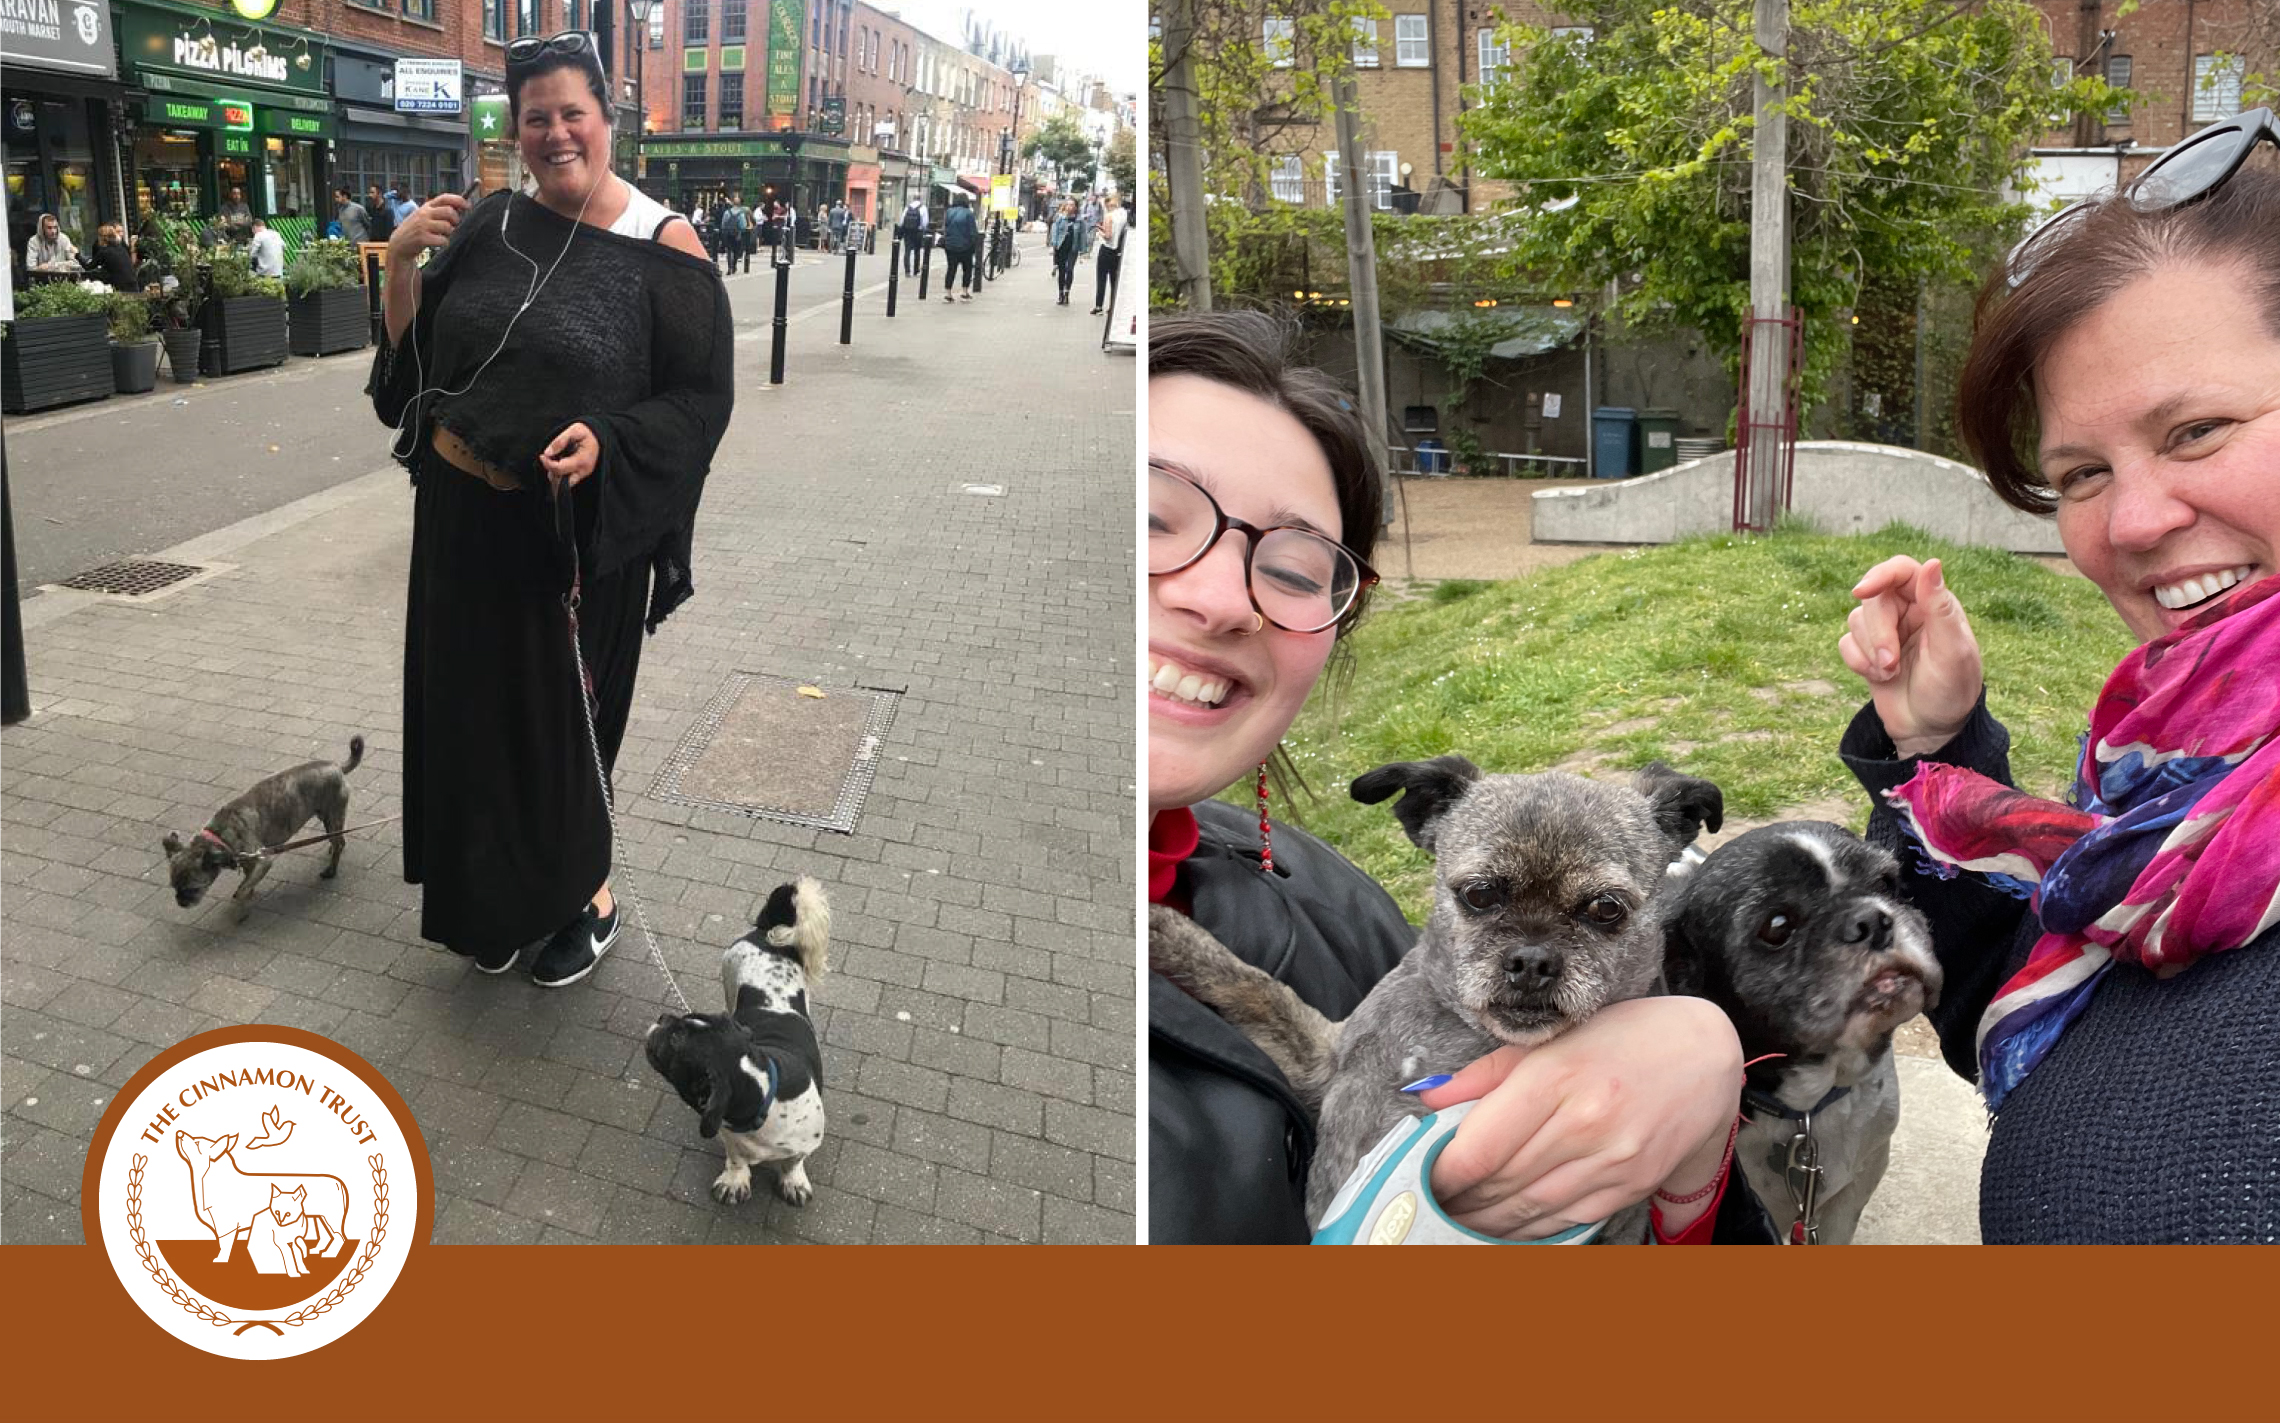 Photo of dog walker and two dogs - benefits of dog walking and mental health